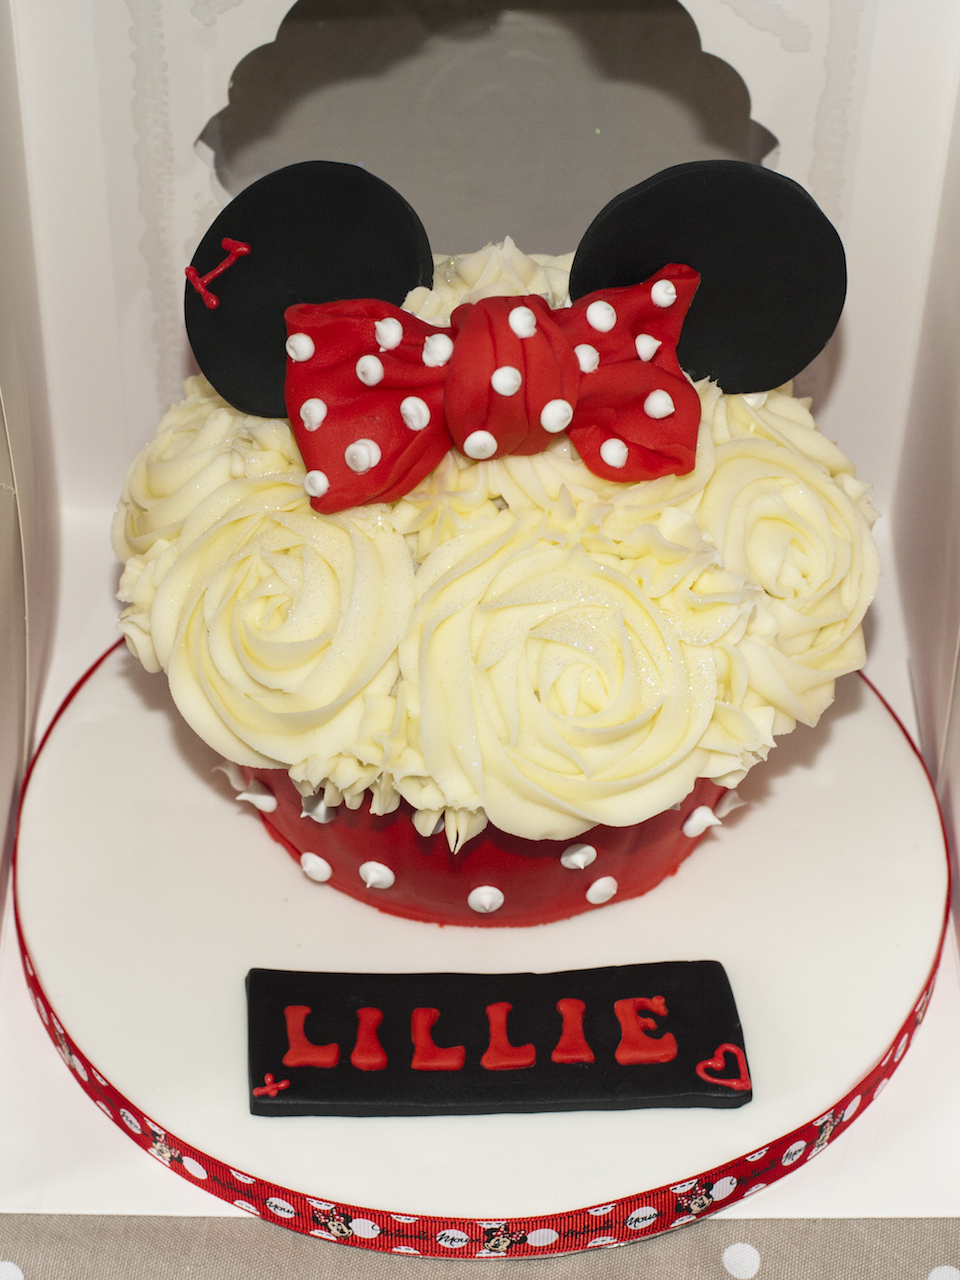 https://cakedinstyle.co.uk/wp-content/uploads/2015/08/minnie-mouse-cupcake.jpg